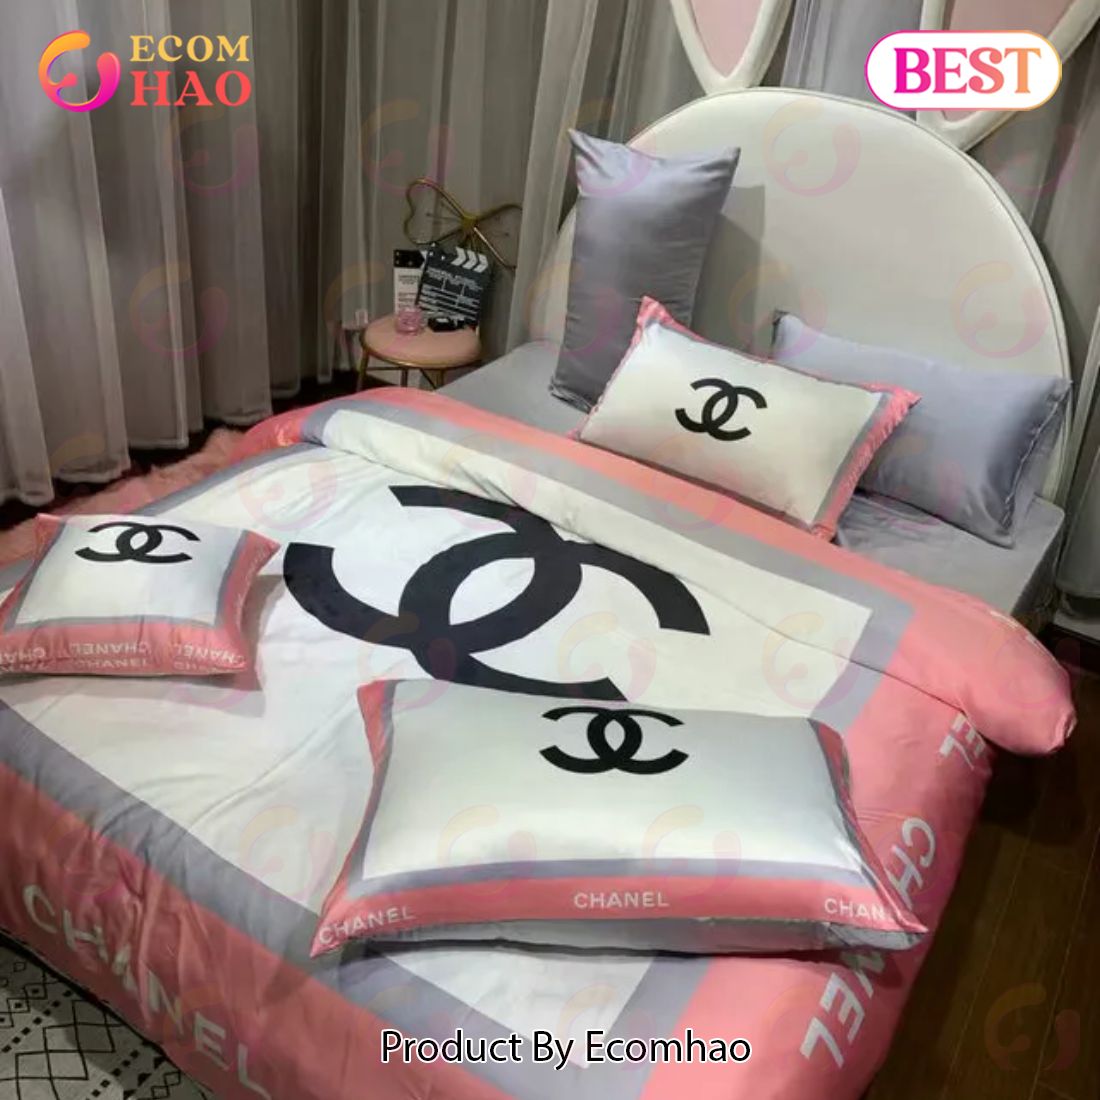 Chanel Logo Printed Bedding Sets Quilt Sets Duvet Cover Luxury Brand Bedding Decor Bedroom Sets Best Luxury Bed Sets Gift Thankgivings And Christmas